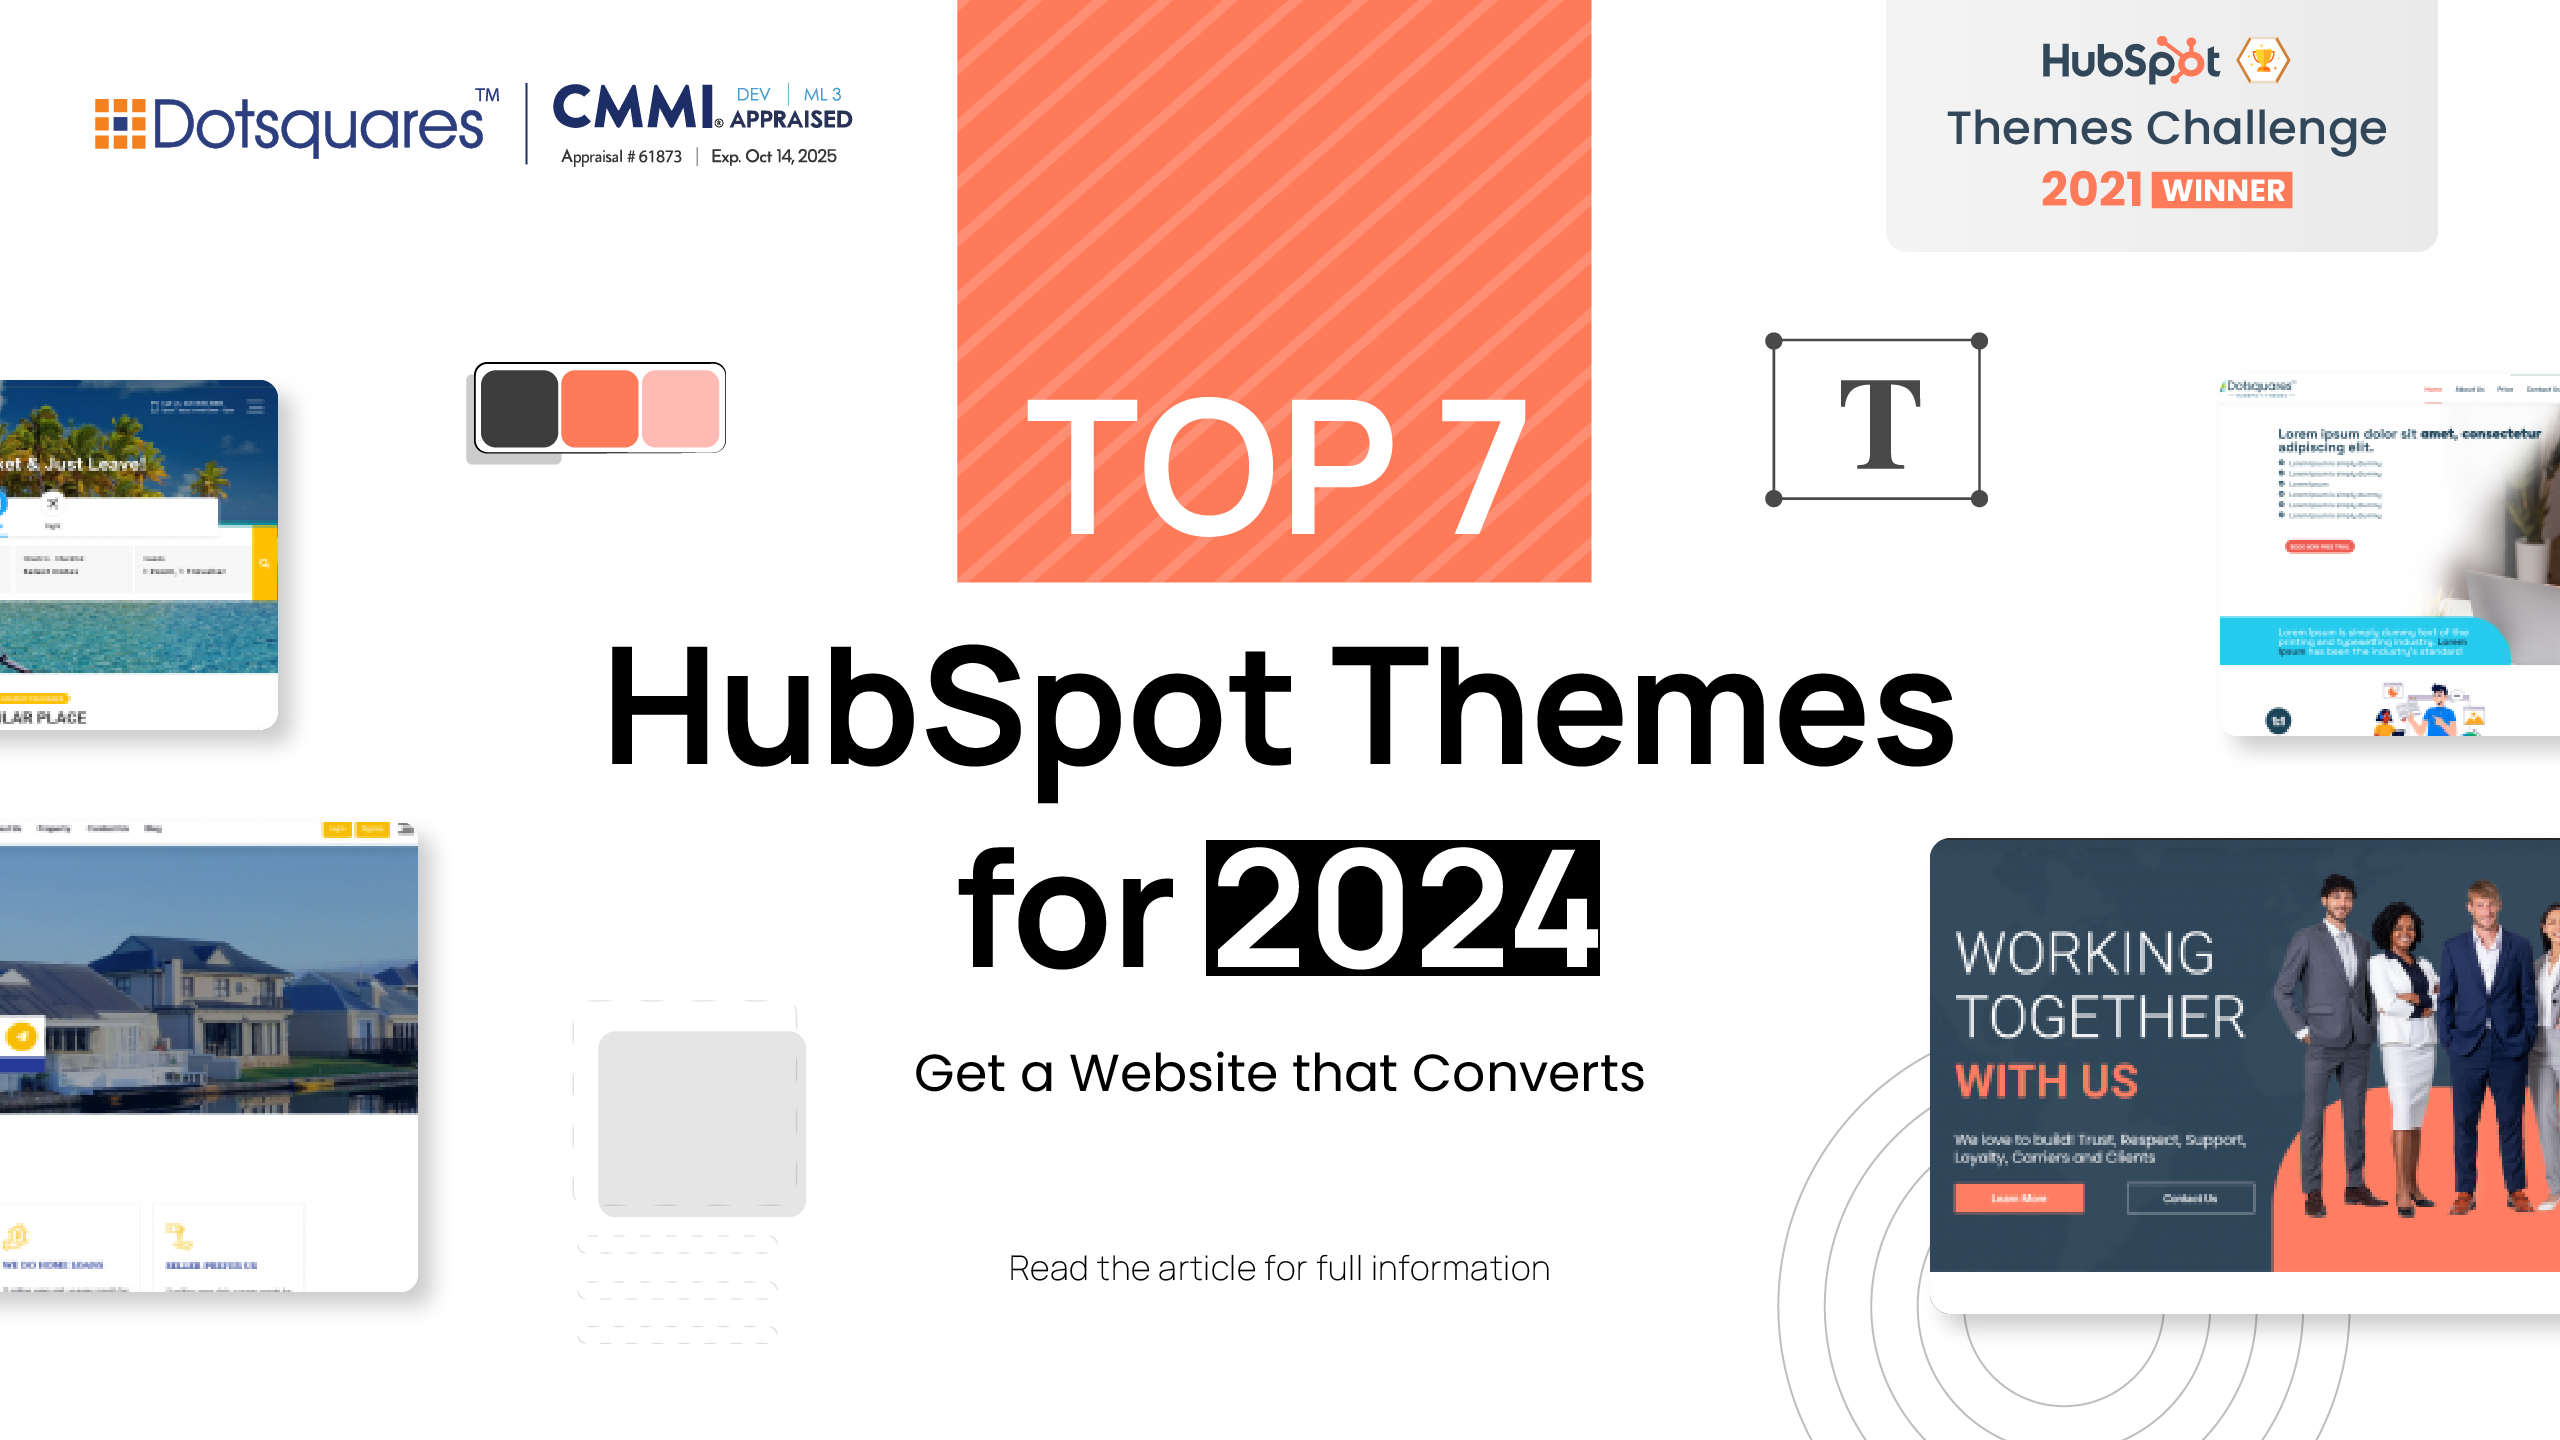 Top 7 HubSpot Themes for 2024: Get a Website That Converts